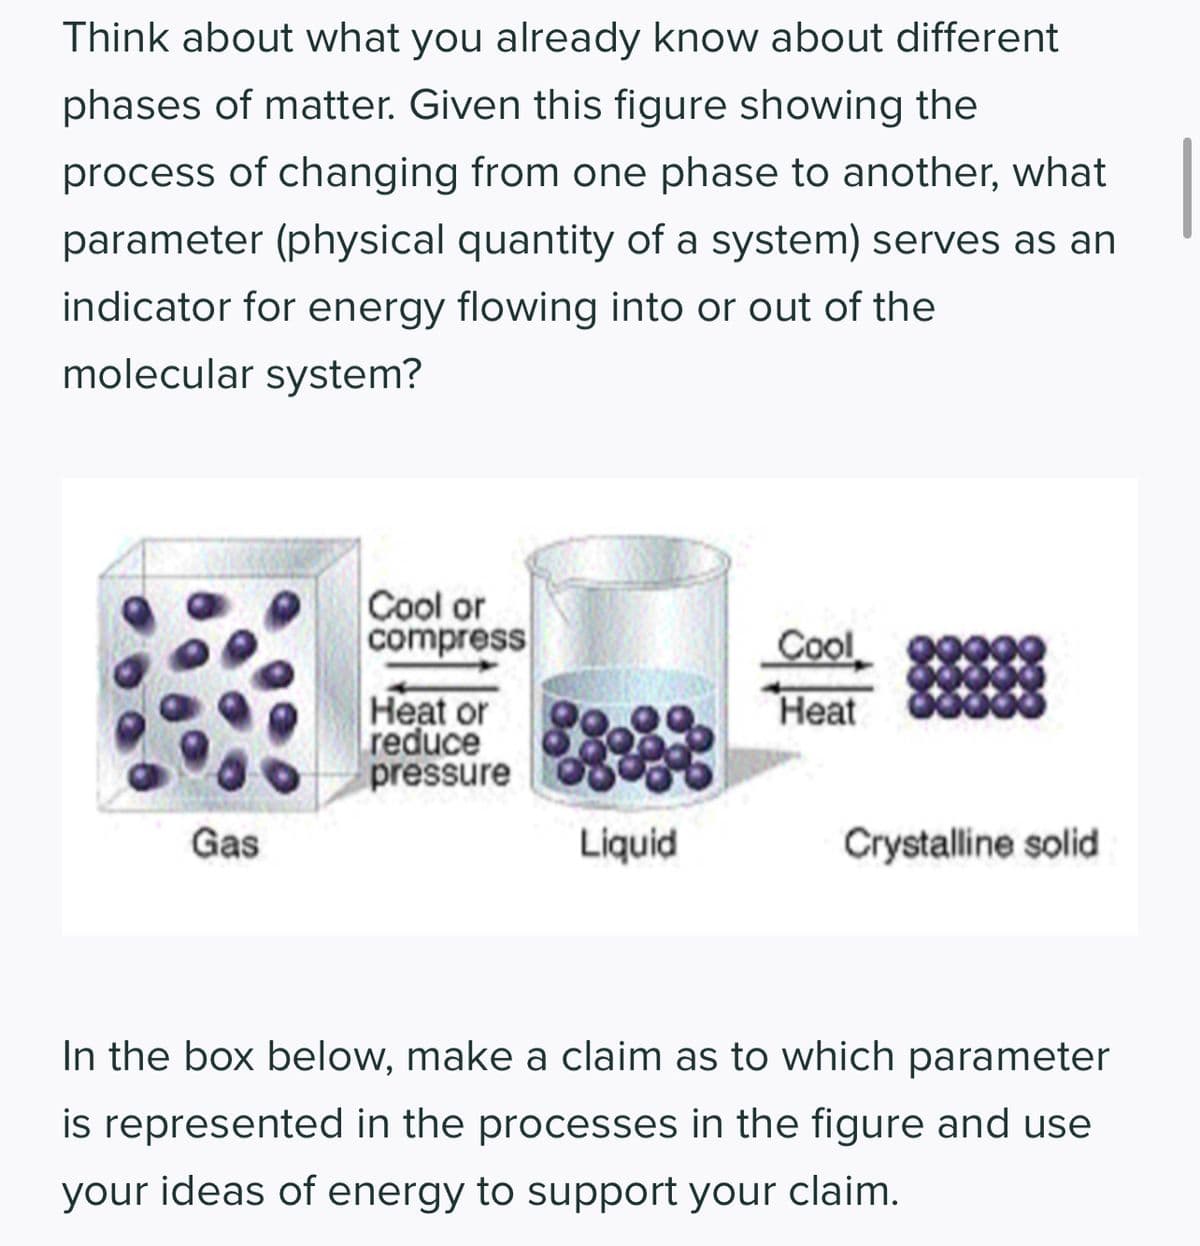 Think about what you already know about different
phases of matter. Given this figure showing the
process of changing from one phase to another, what
parameter (physical quantity of a system) serves as an
indicator for energy flowing into or out of the
molecular system?
Gas
Cool or
compress
Heat or
reduce
pressure
Liquid
Cool
Heat
Crystalline solid
In the box below, make a claim as to which parameter
is represented in the processes in the figure and use
your ideas of energy to support your claim.